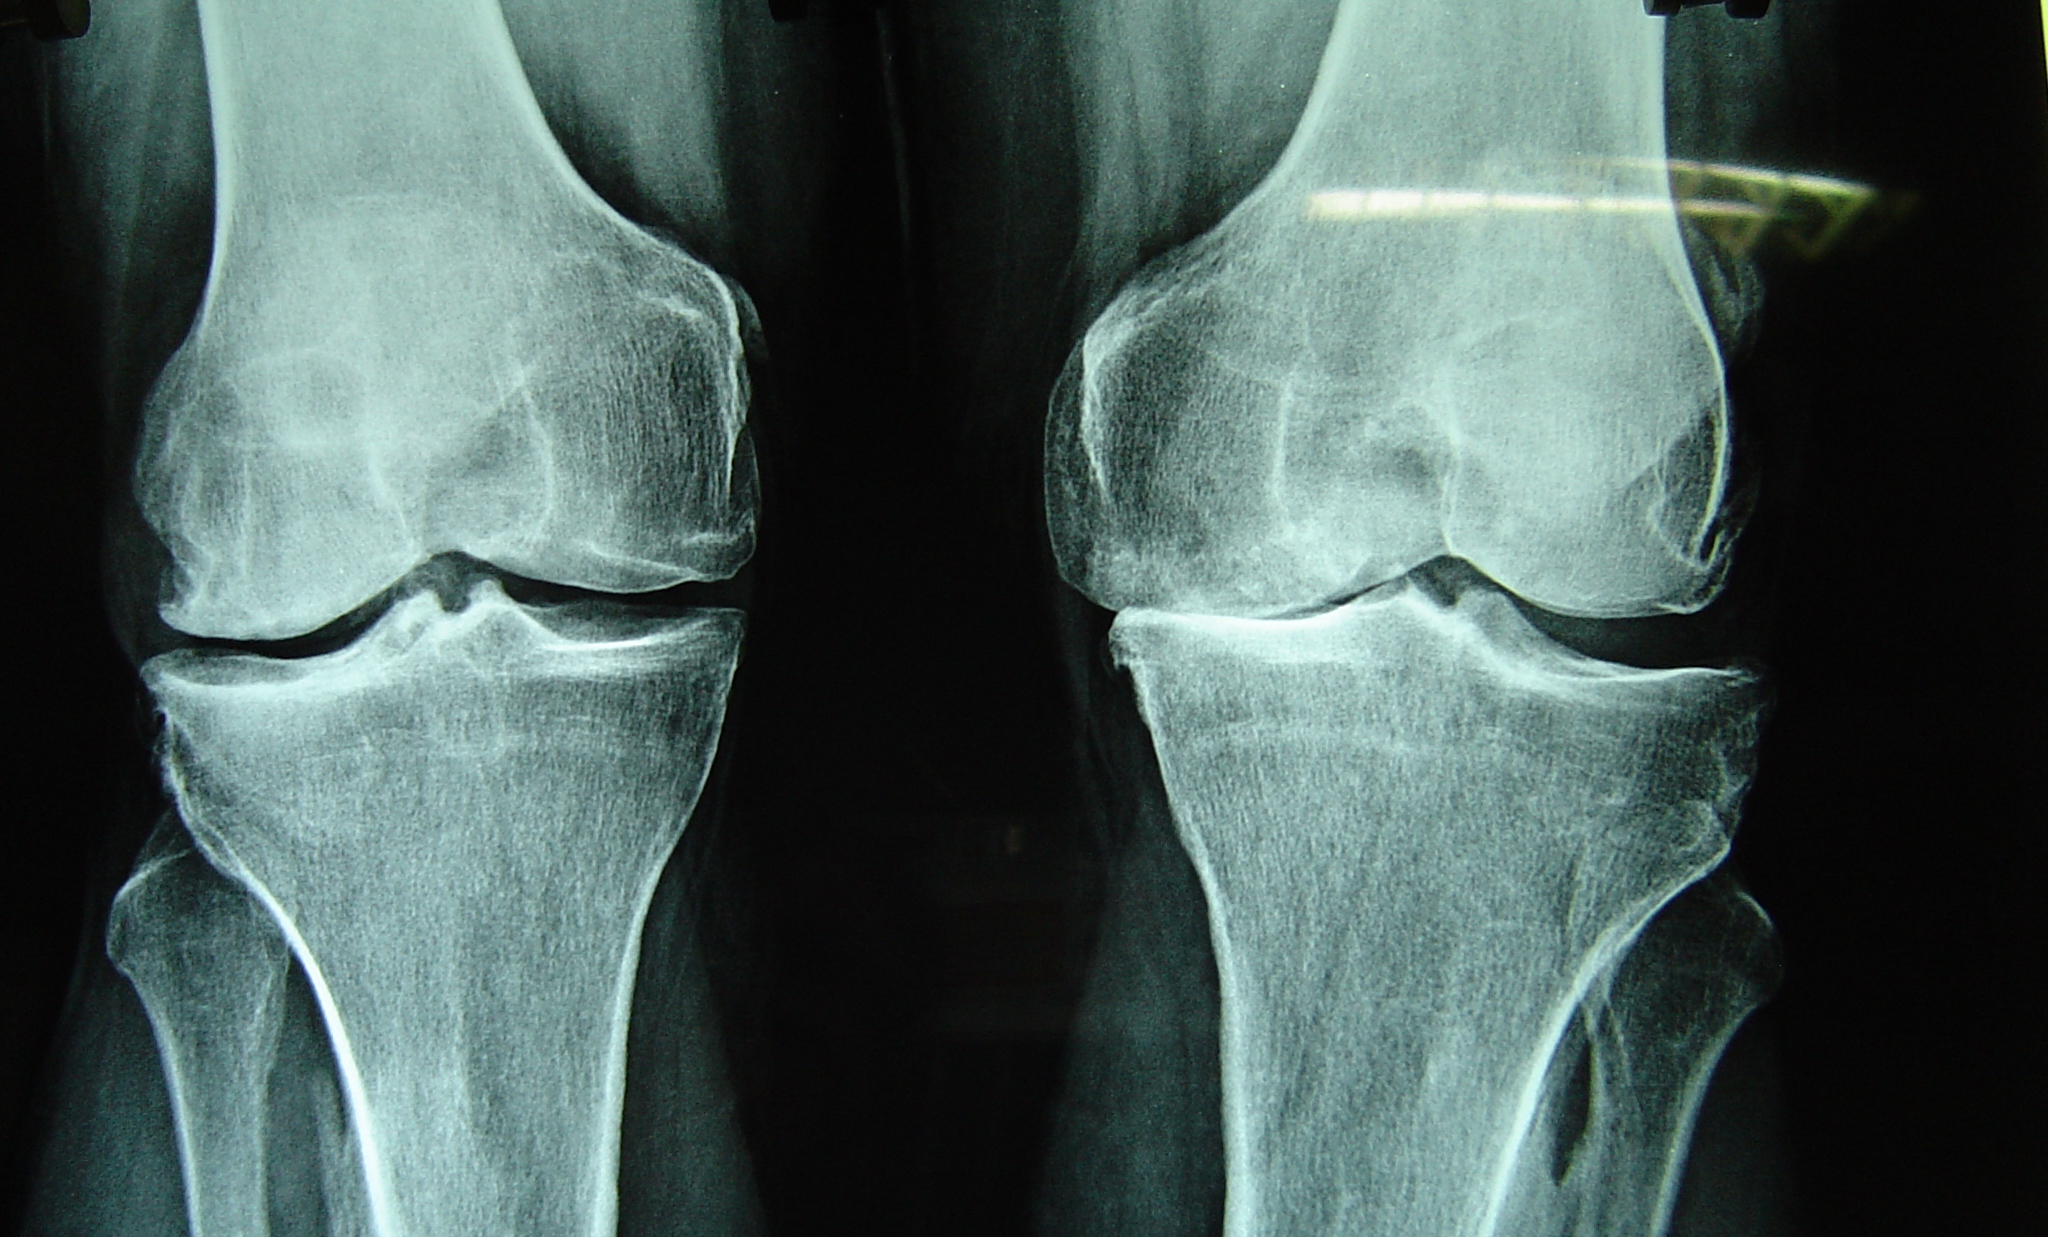  X-ray Of Normal (Left) and Abnormal (Right) knee